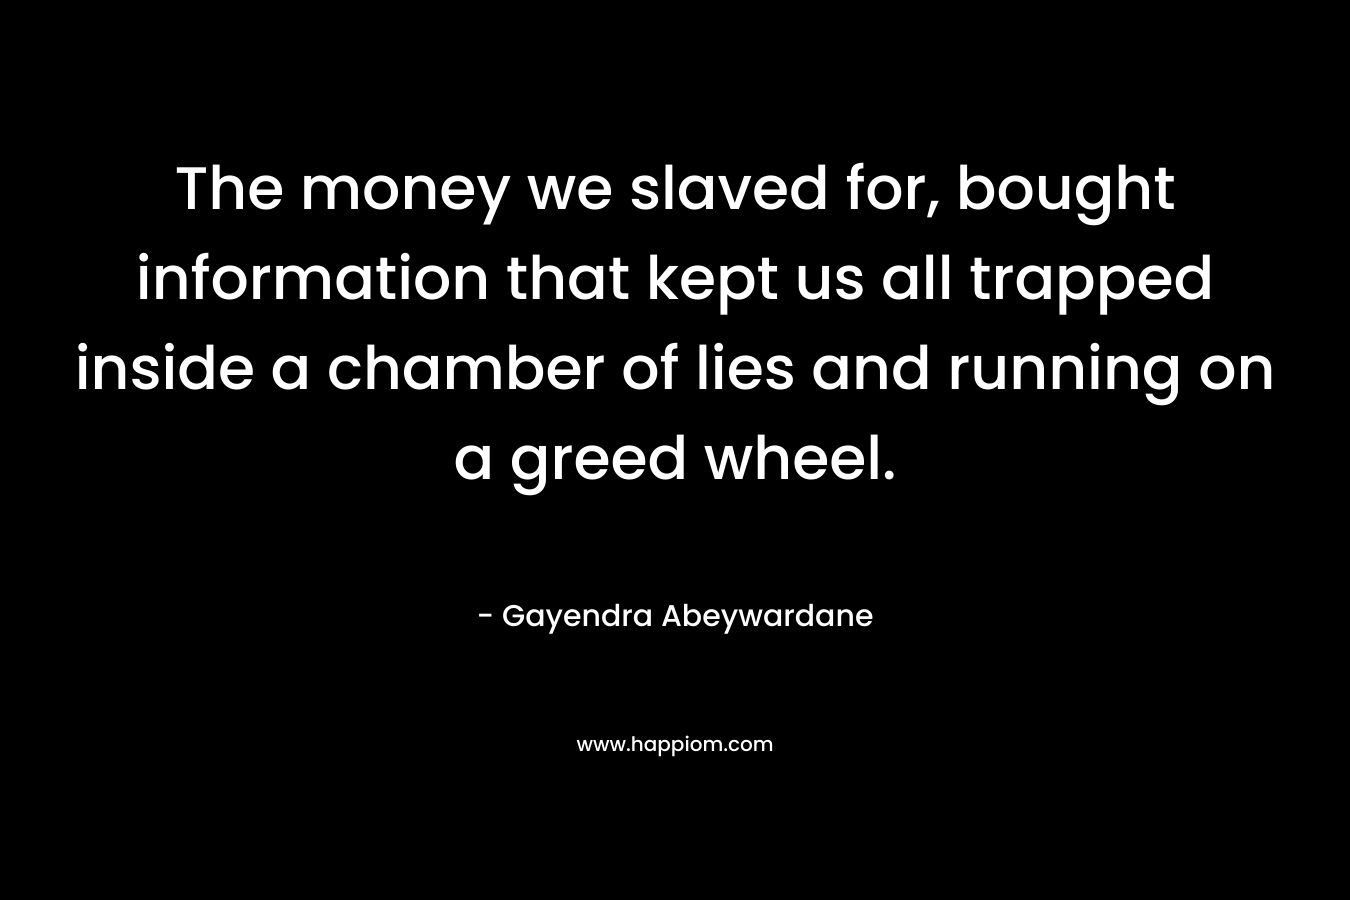 The money we slaved for, bought information that kept us all trapped inside a chamber of lies and running on a greed wheel.